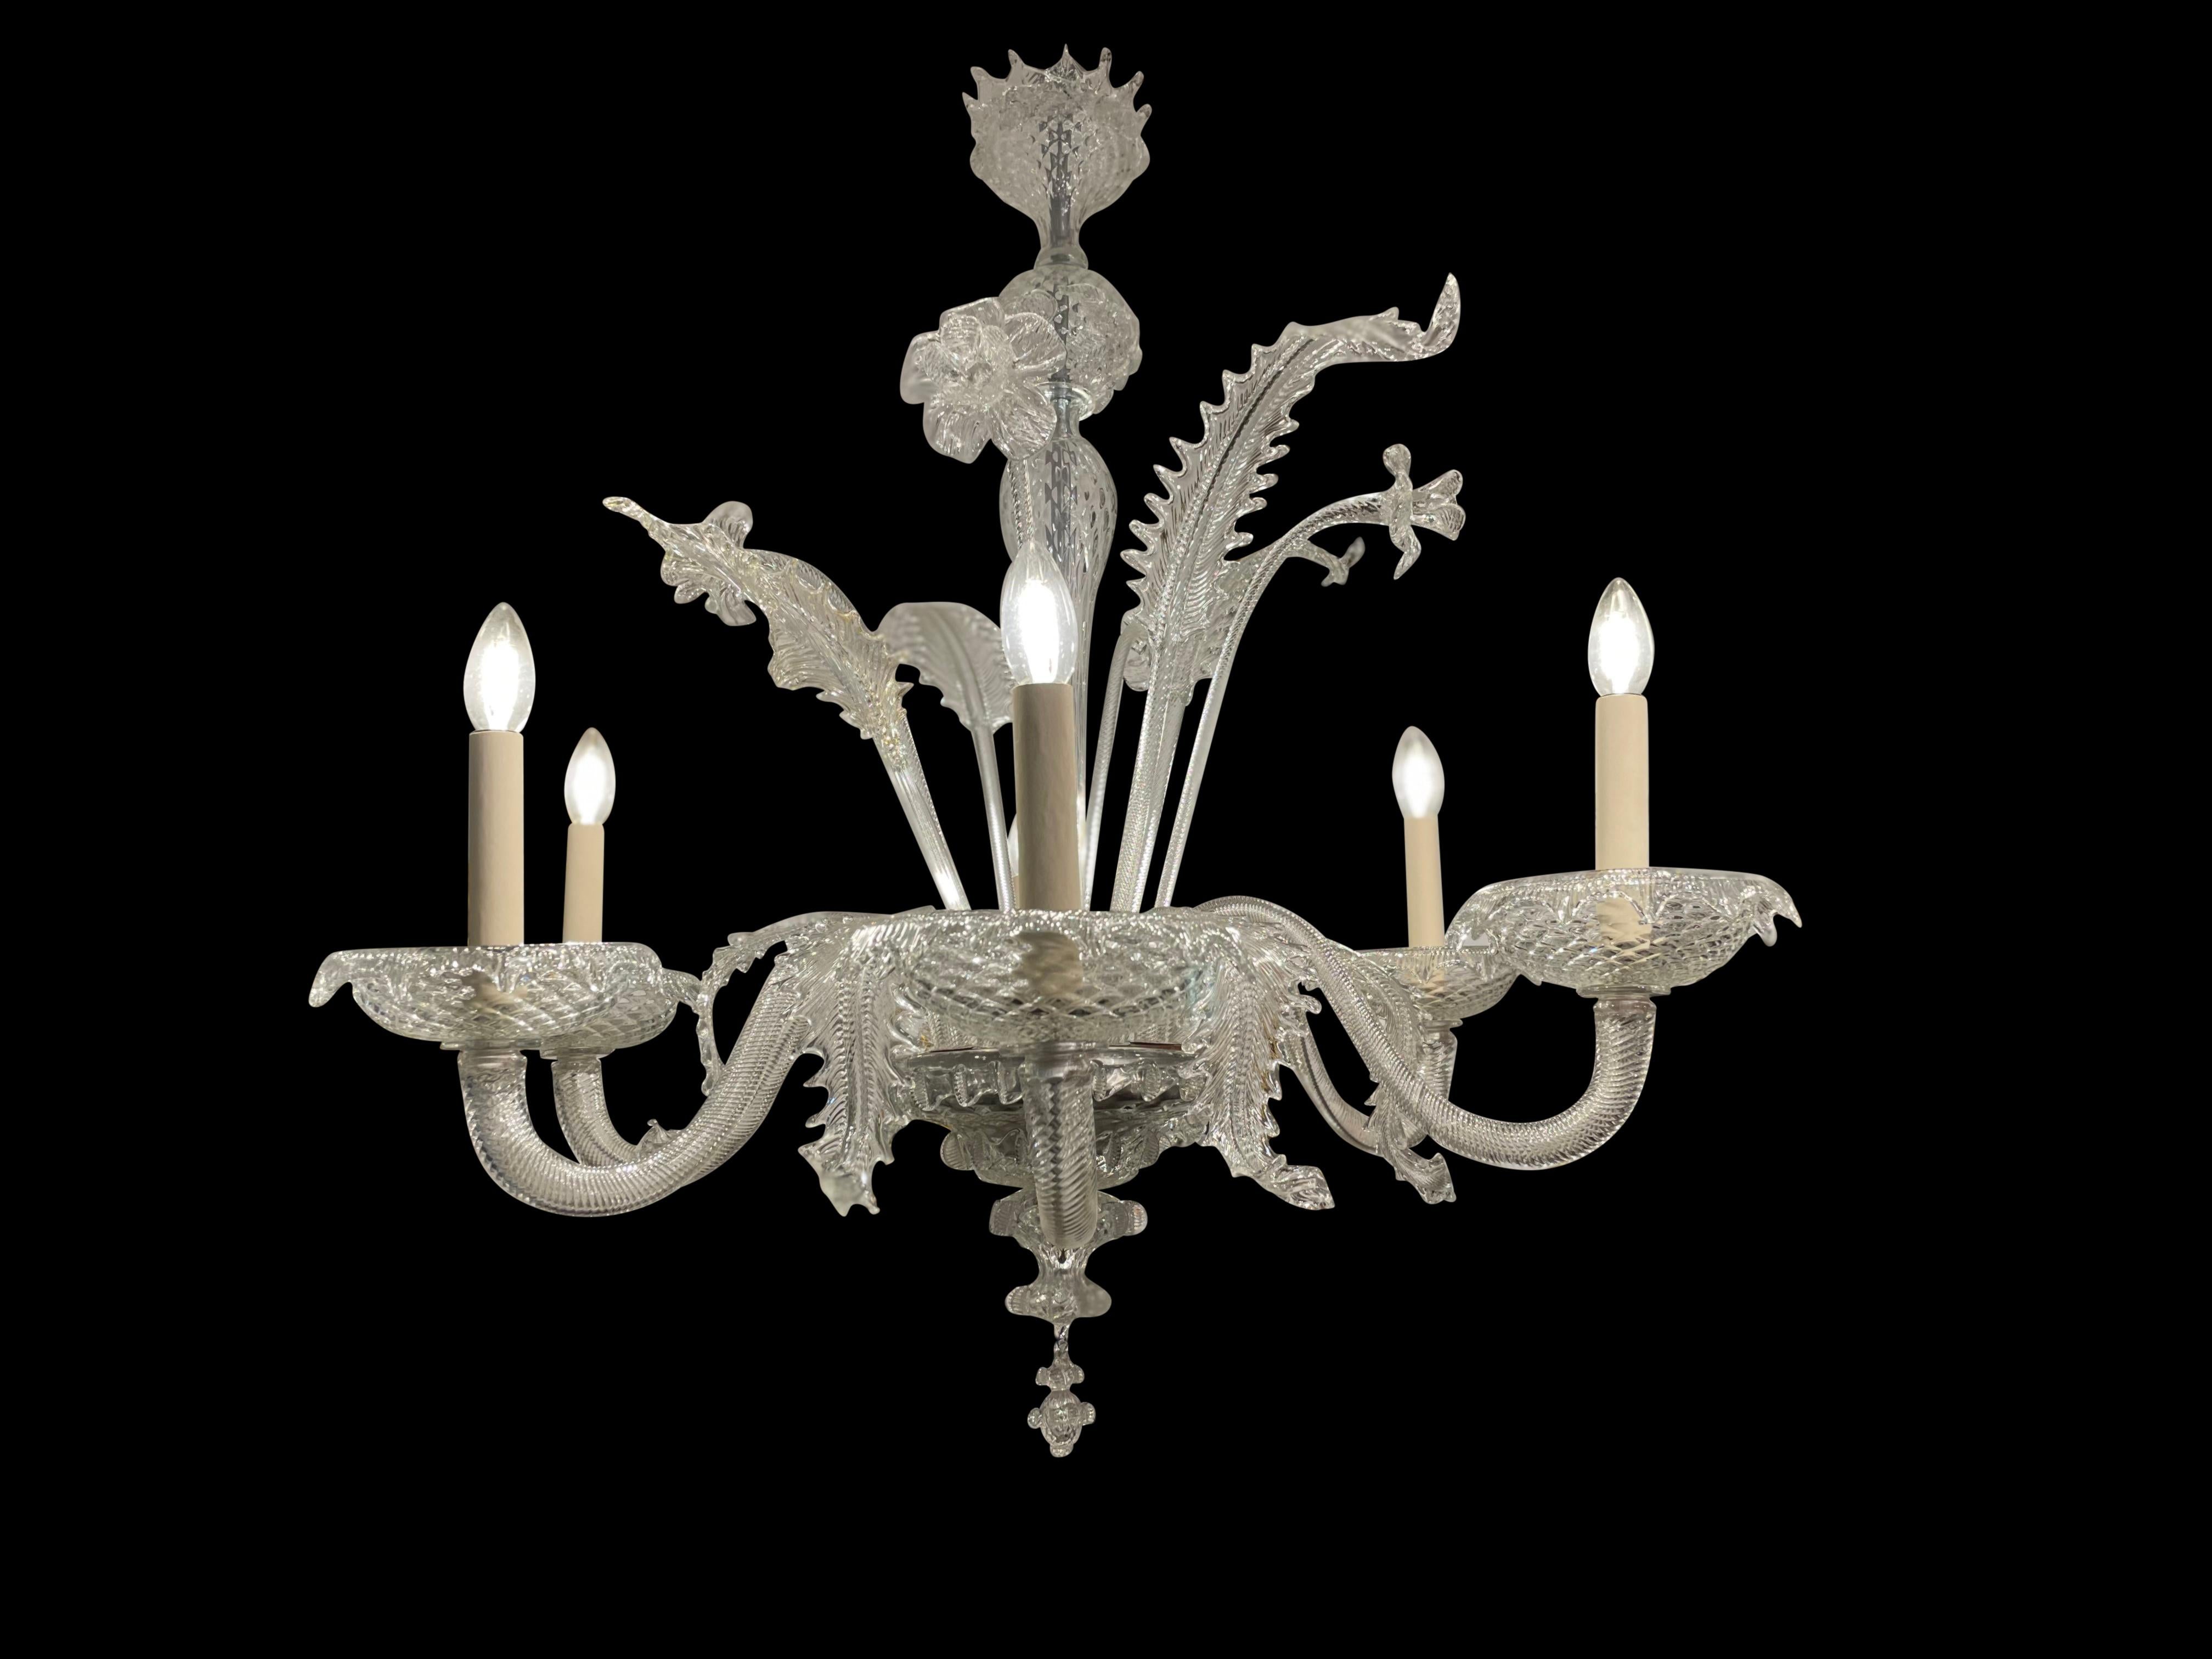 Vintage Venetian/Murano Glass Chandelier, 6 Arm, 20th Century In Excellent Condition For Sale In London, GB